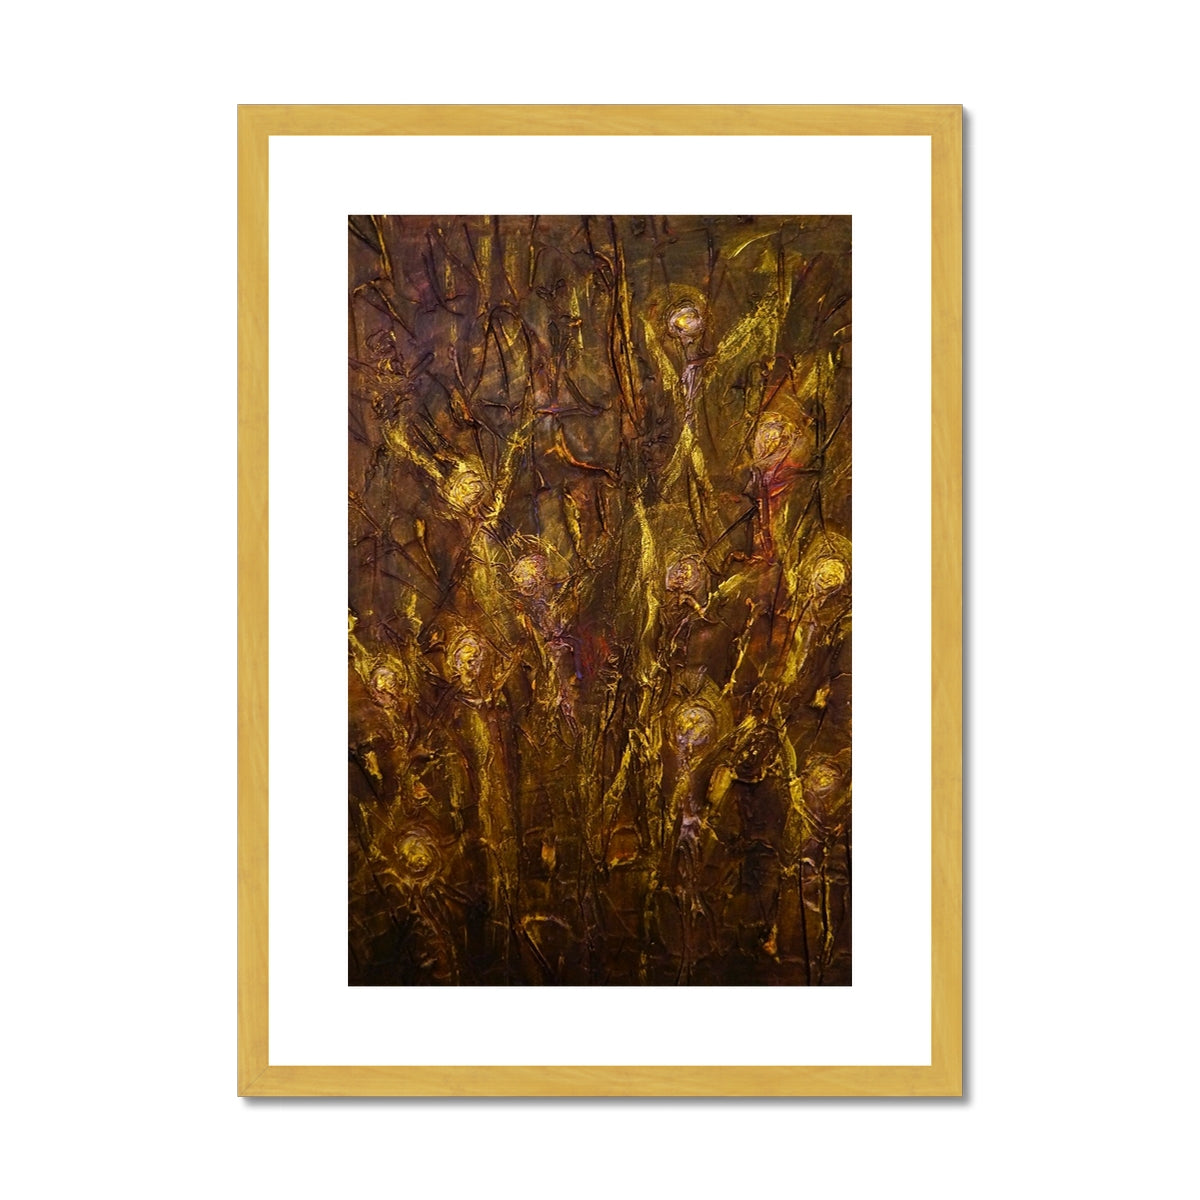 Tam O Shanter Witches Painting | Antique Framed & Mounted Prints From Scotland-Antique Framed & Mounted Prints-Abstract & Impressionistic Art Gallery-A2 Portrait-Gold Frame-Paintings, Prints, Homeware, Art Gifts From Scotland By Scottish Artist Kevin Hunter